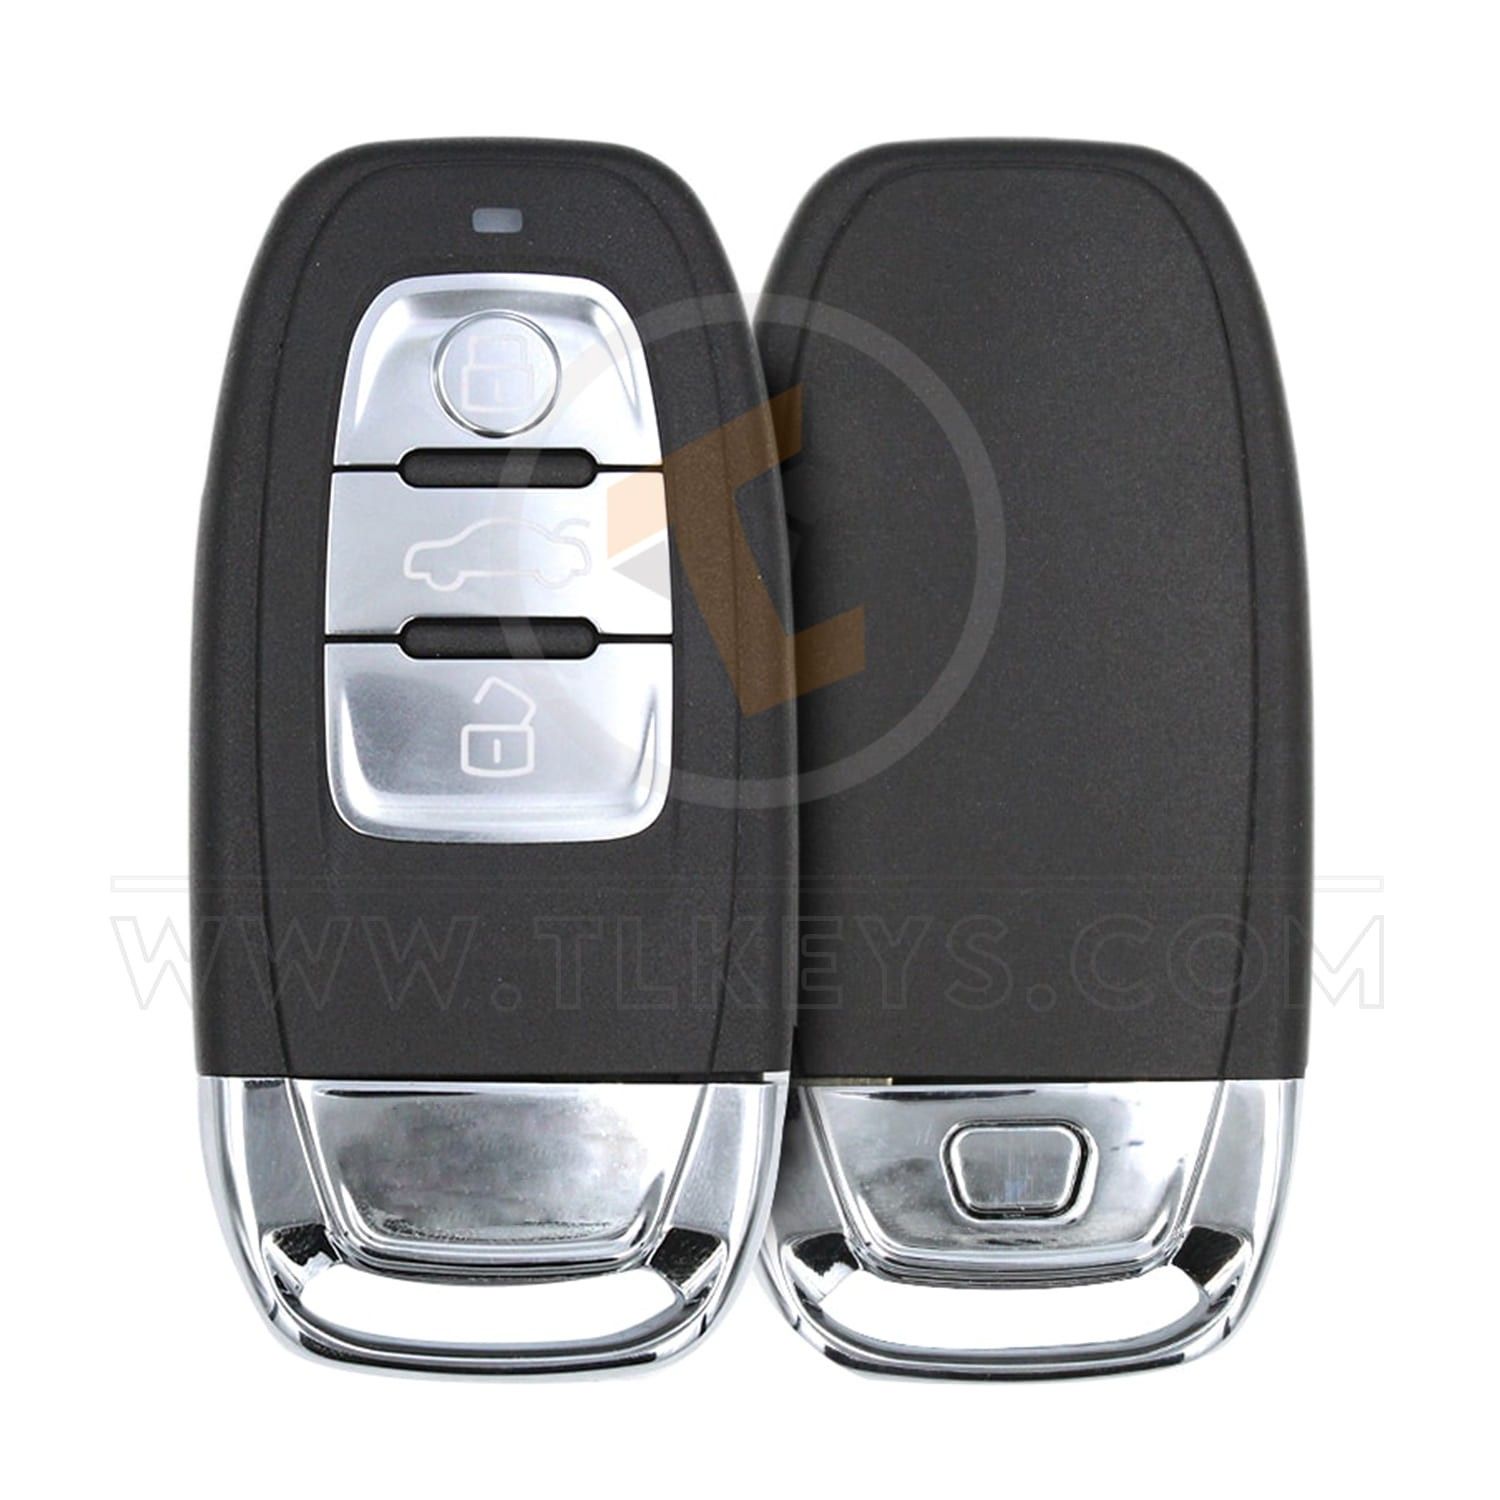  Audi Non-Proximity Smart Remote Key 2009 2018 P/N: 8TO 959 754 C Buttons 3